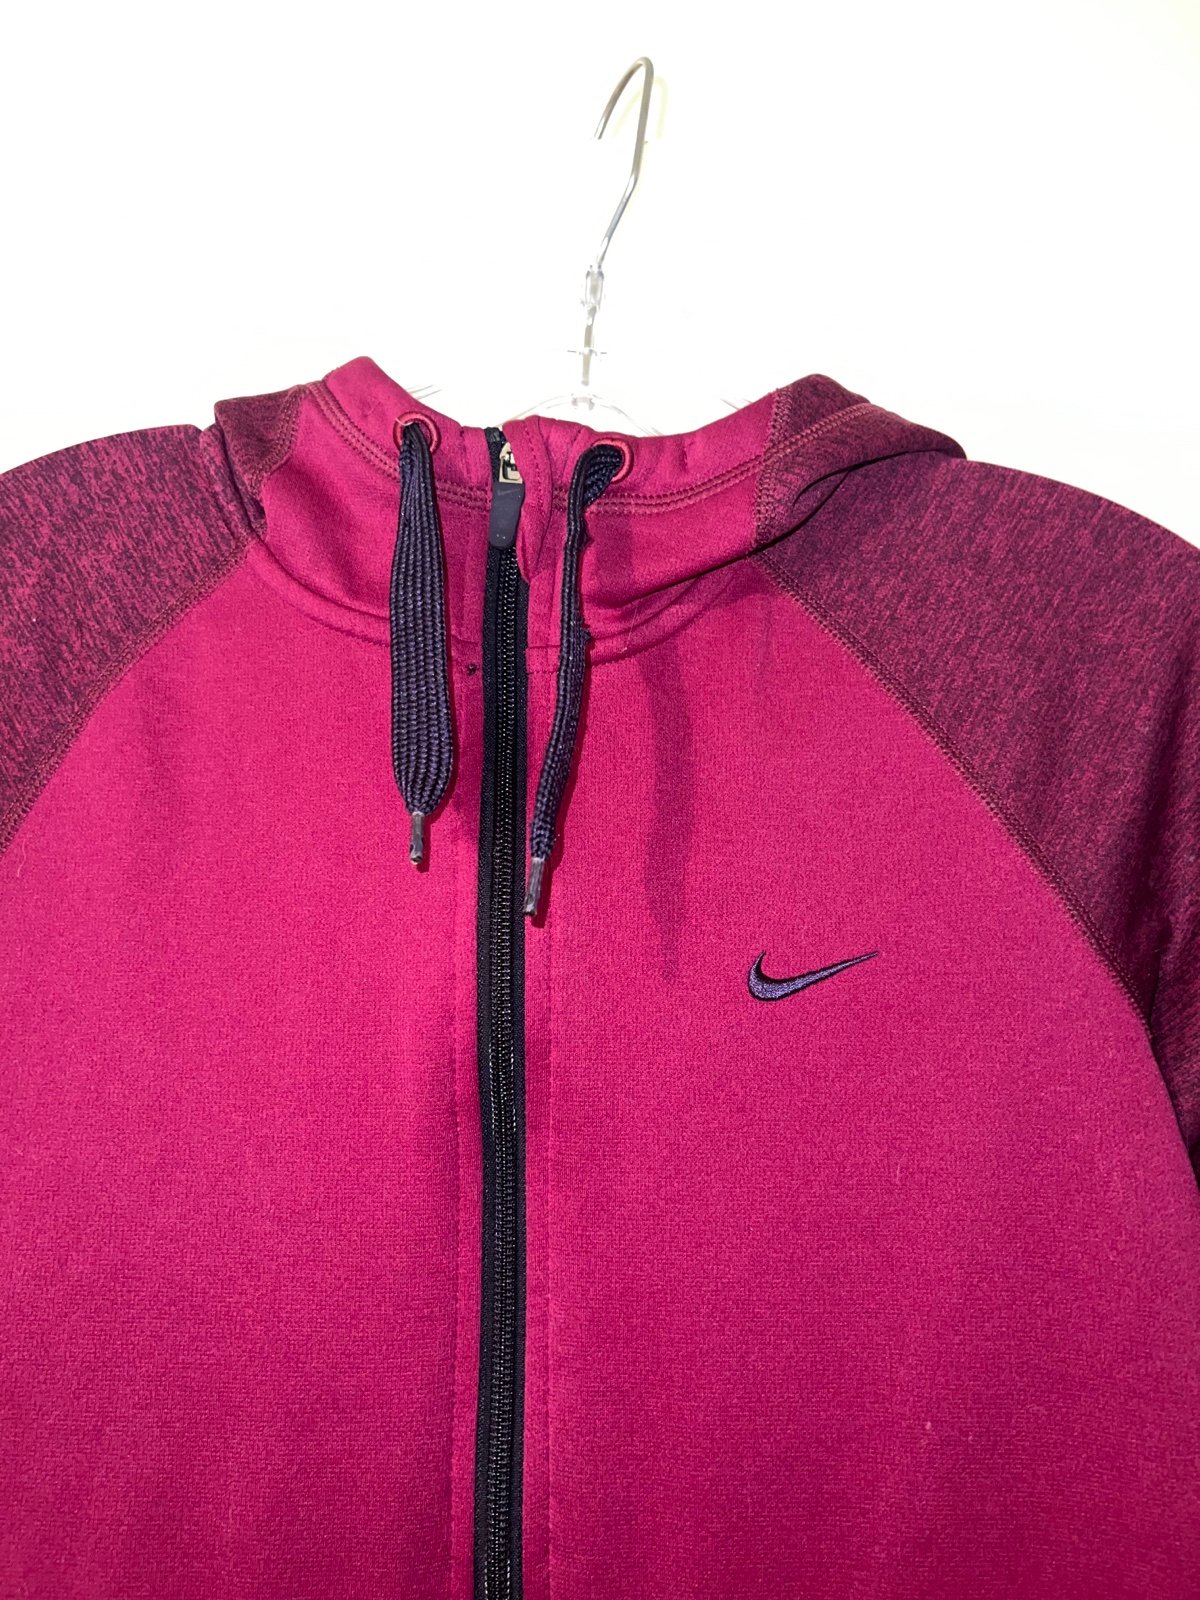 Perfect Nike zip up hoodie jacket, women’s size XS jIPnpBITh Outlet Store